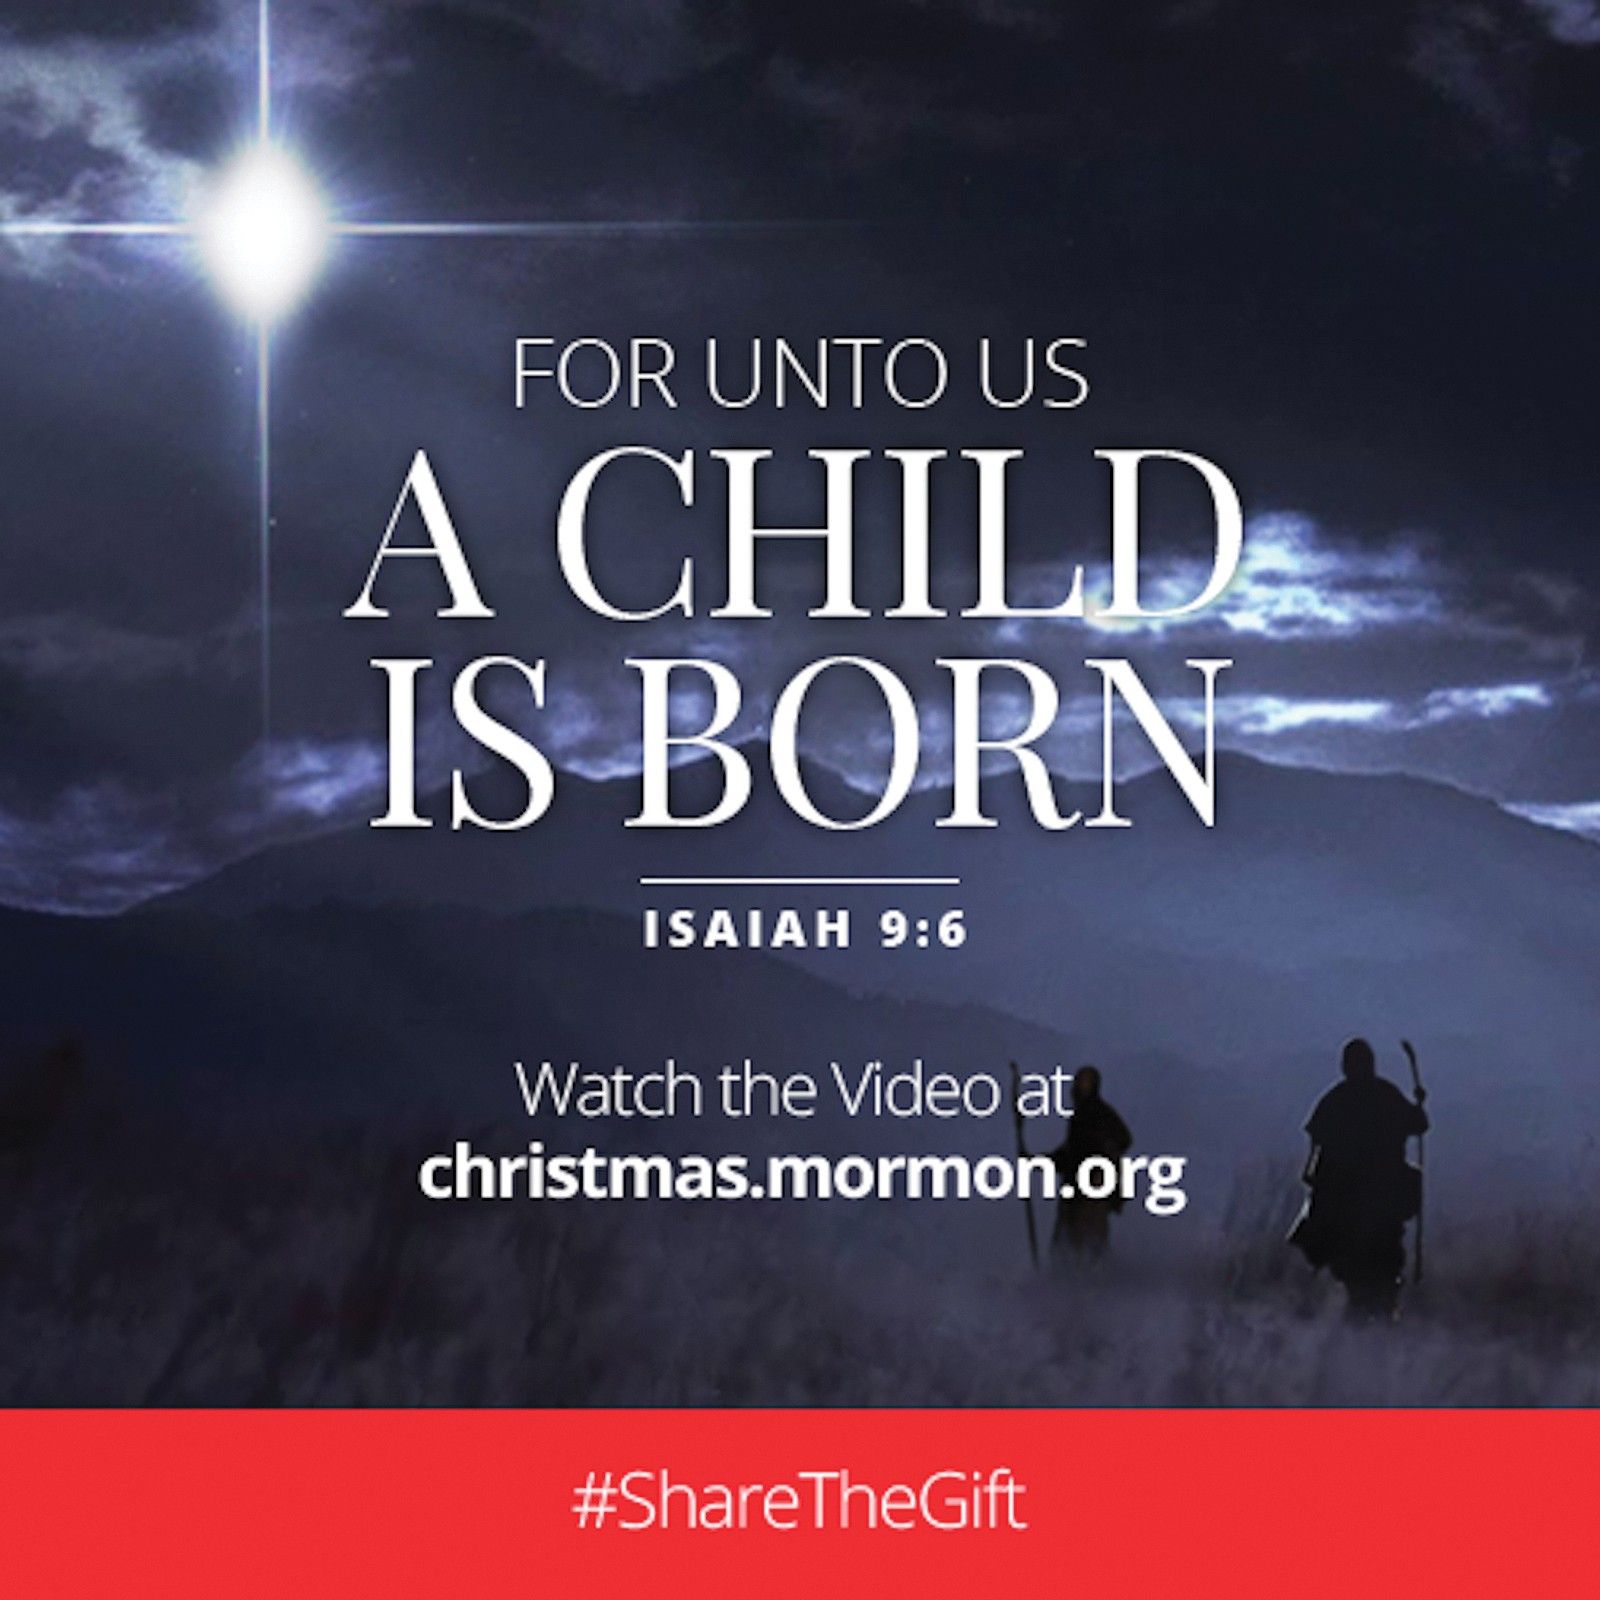 “For unto us a child is born.”—Isaiah 9:6. Watch the video at christmas.mormon.org. #ShareTheGift